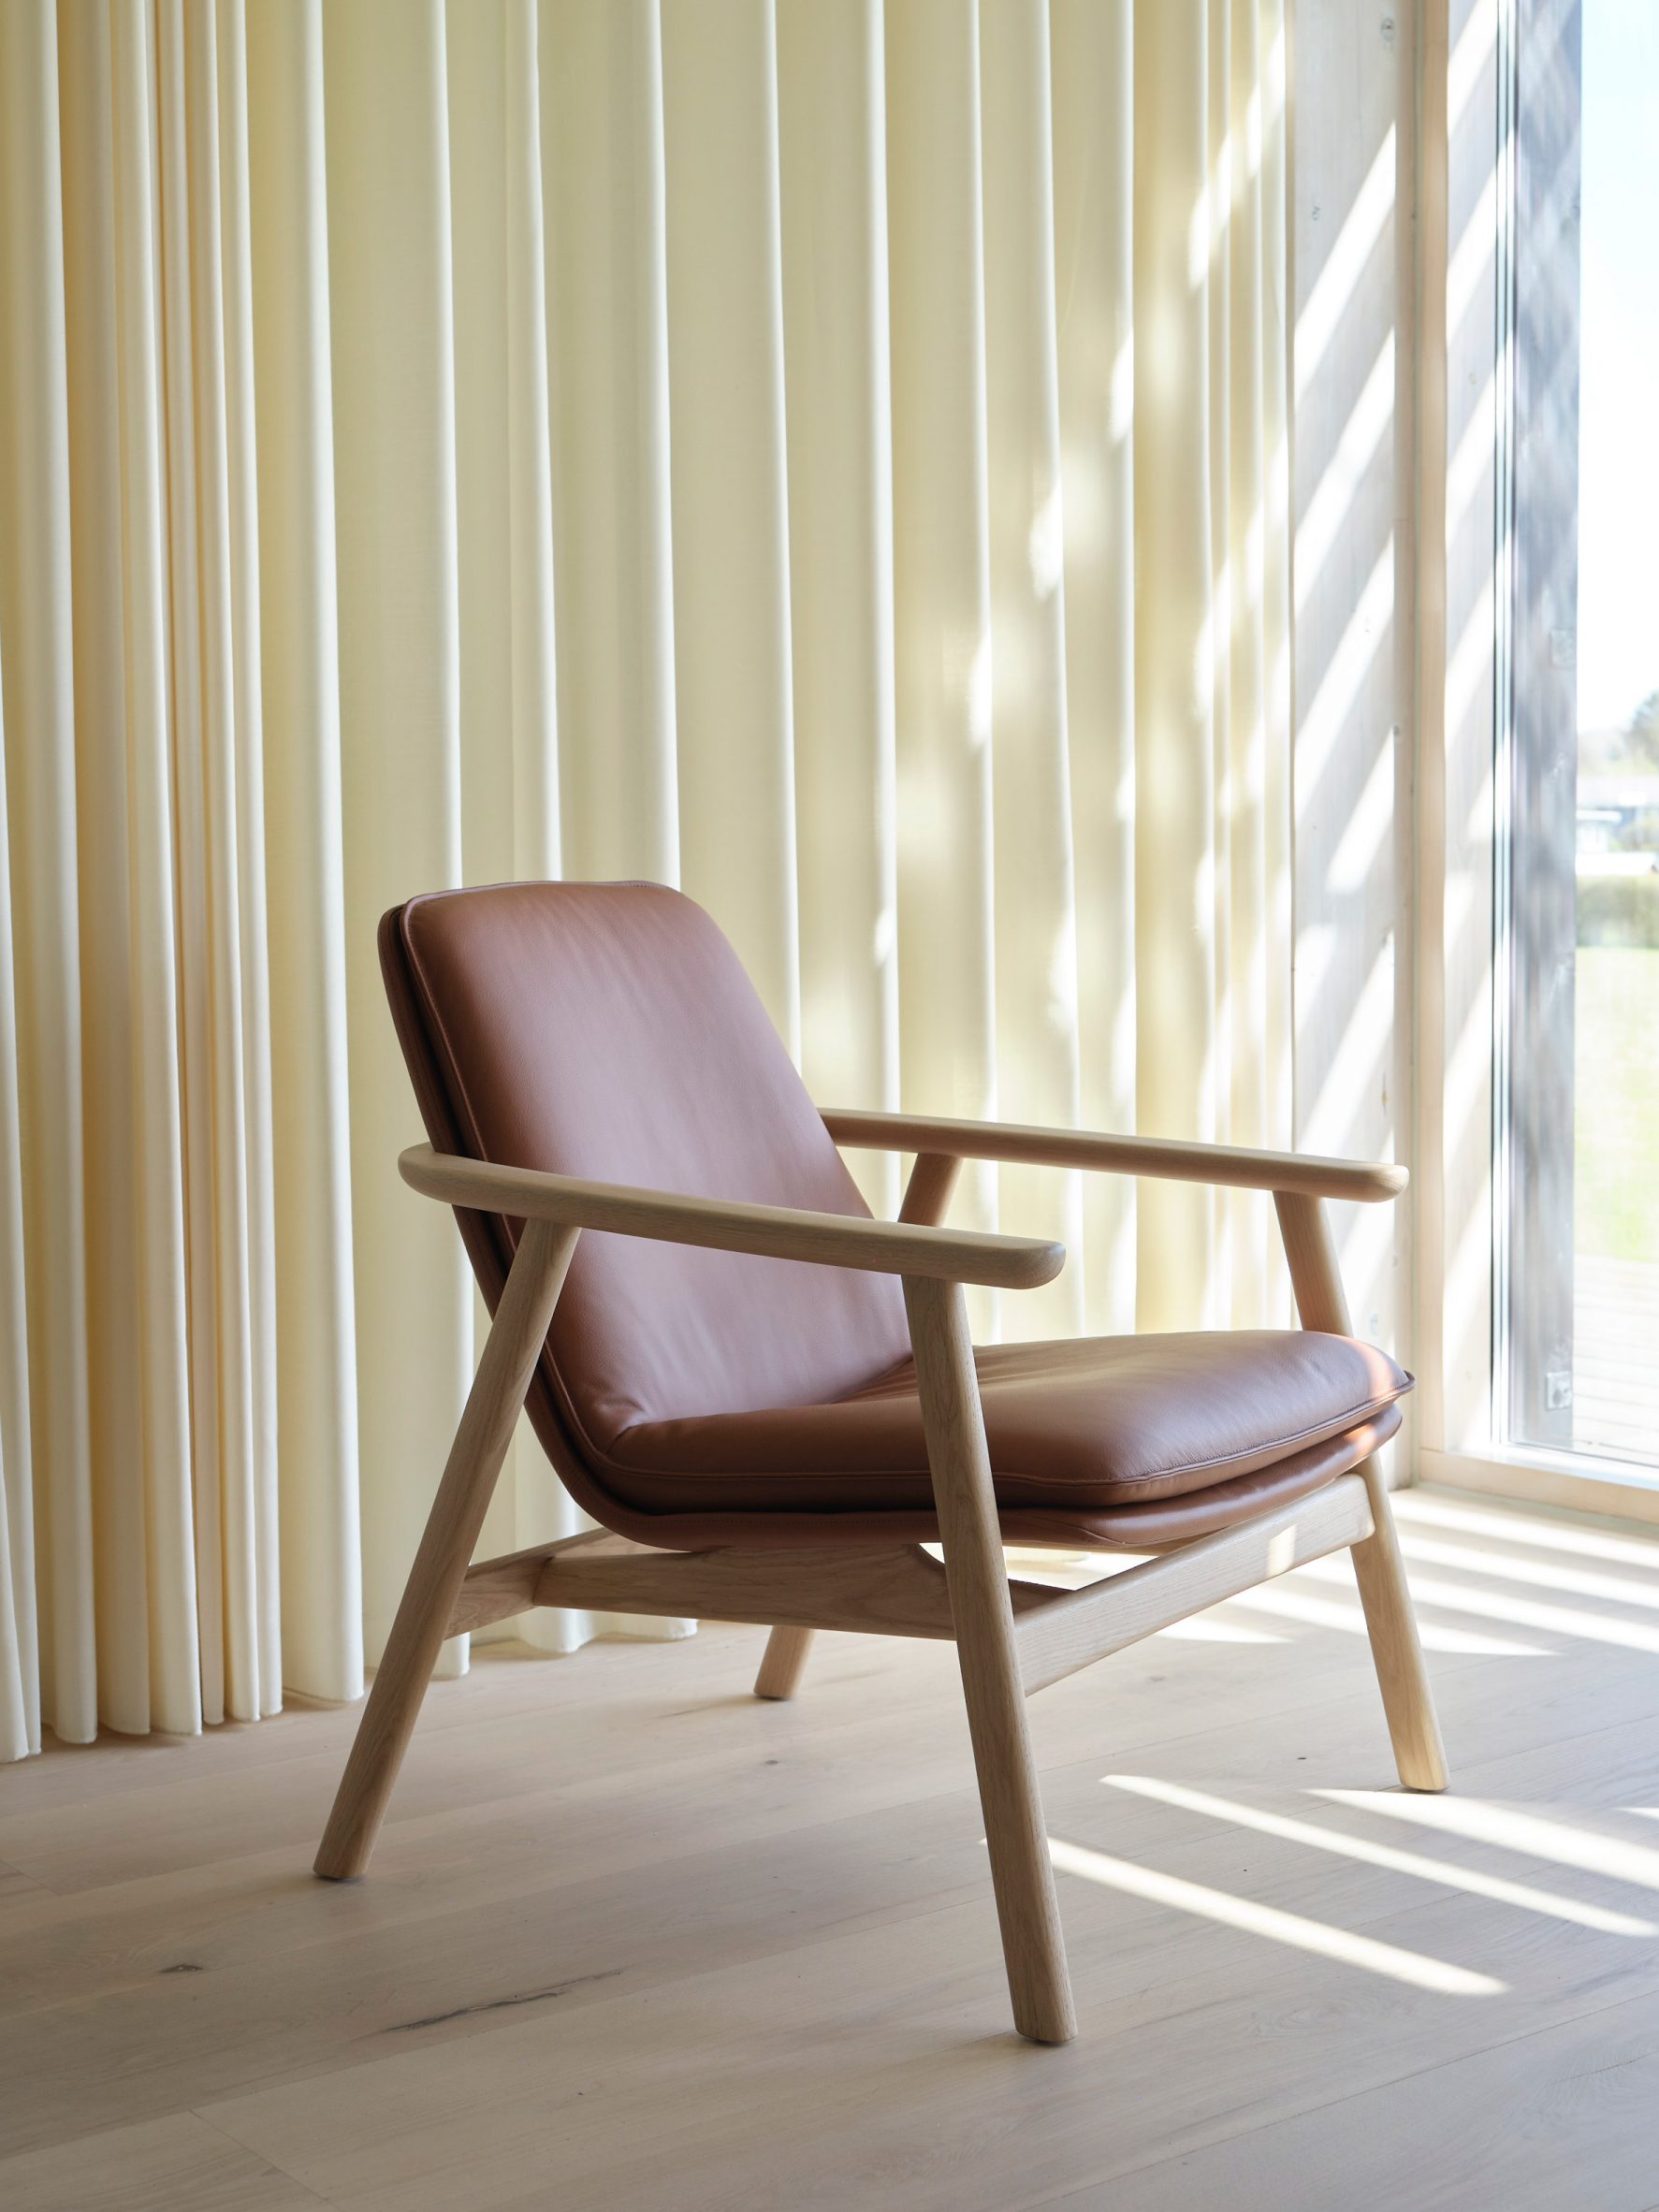 Uku lounge chair by Simon Pengelly for Allermuir